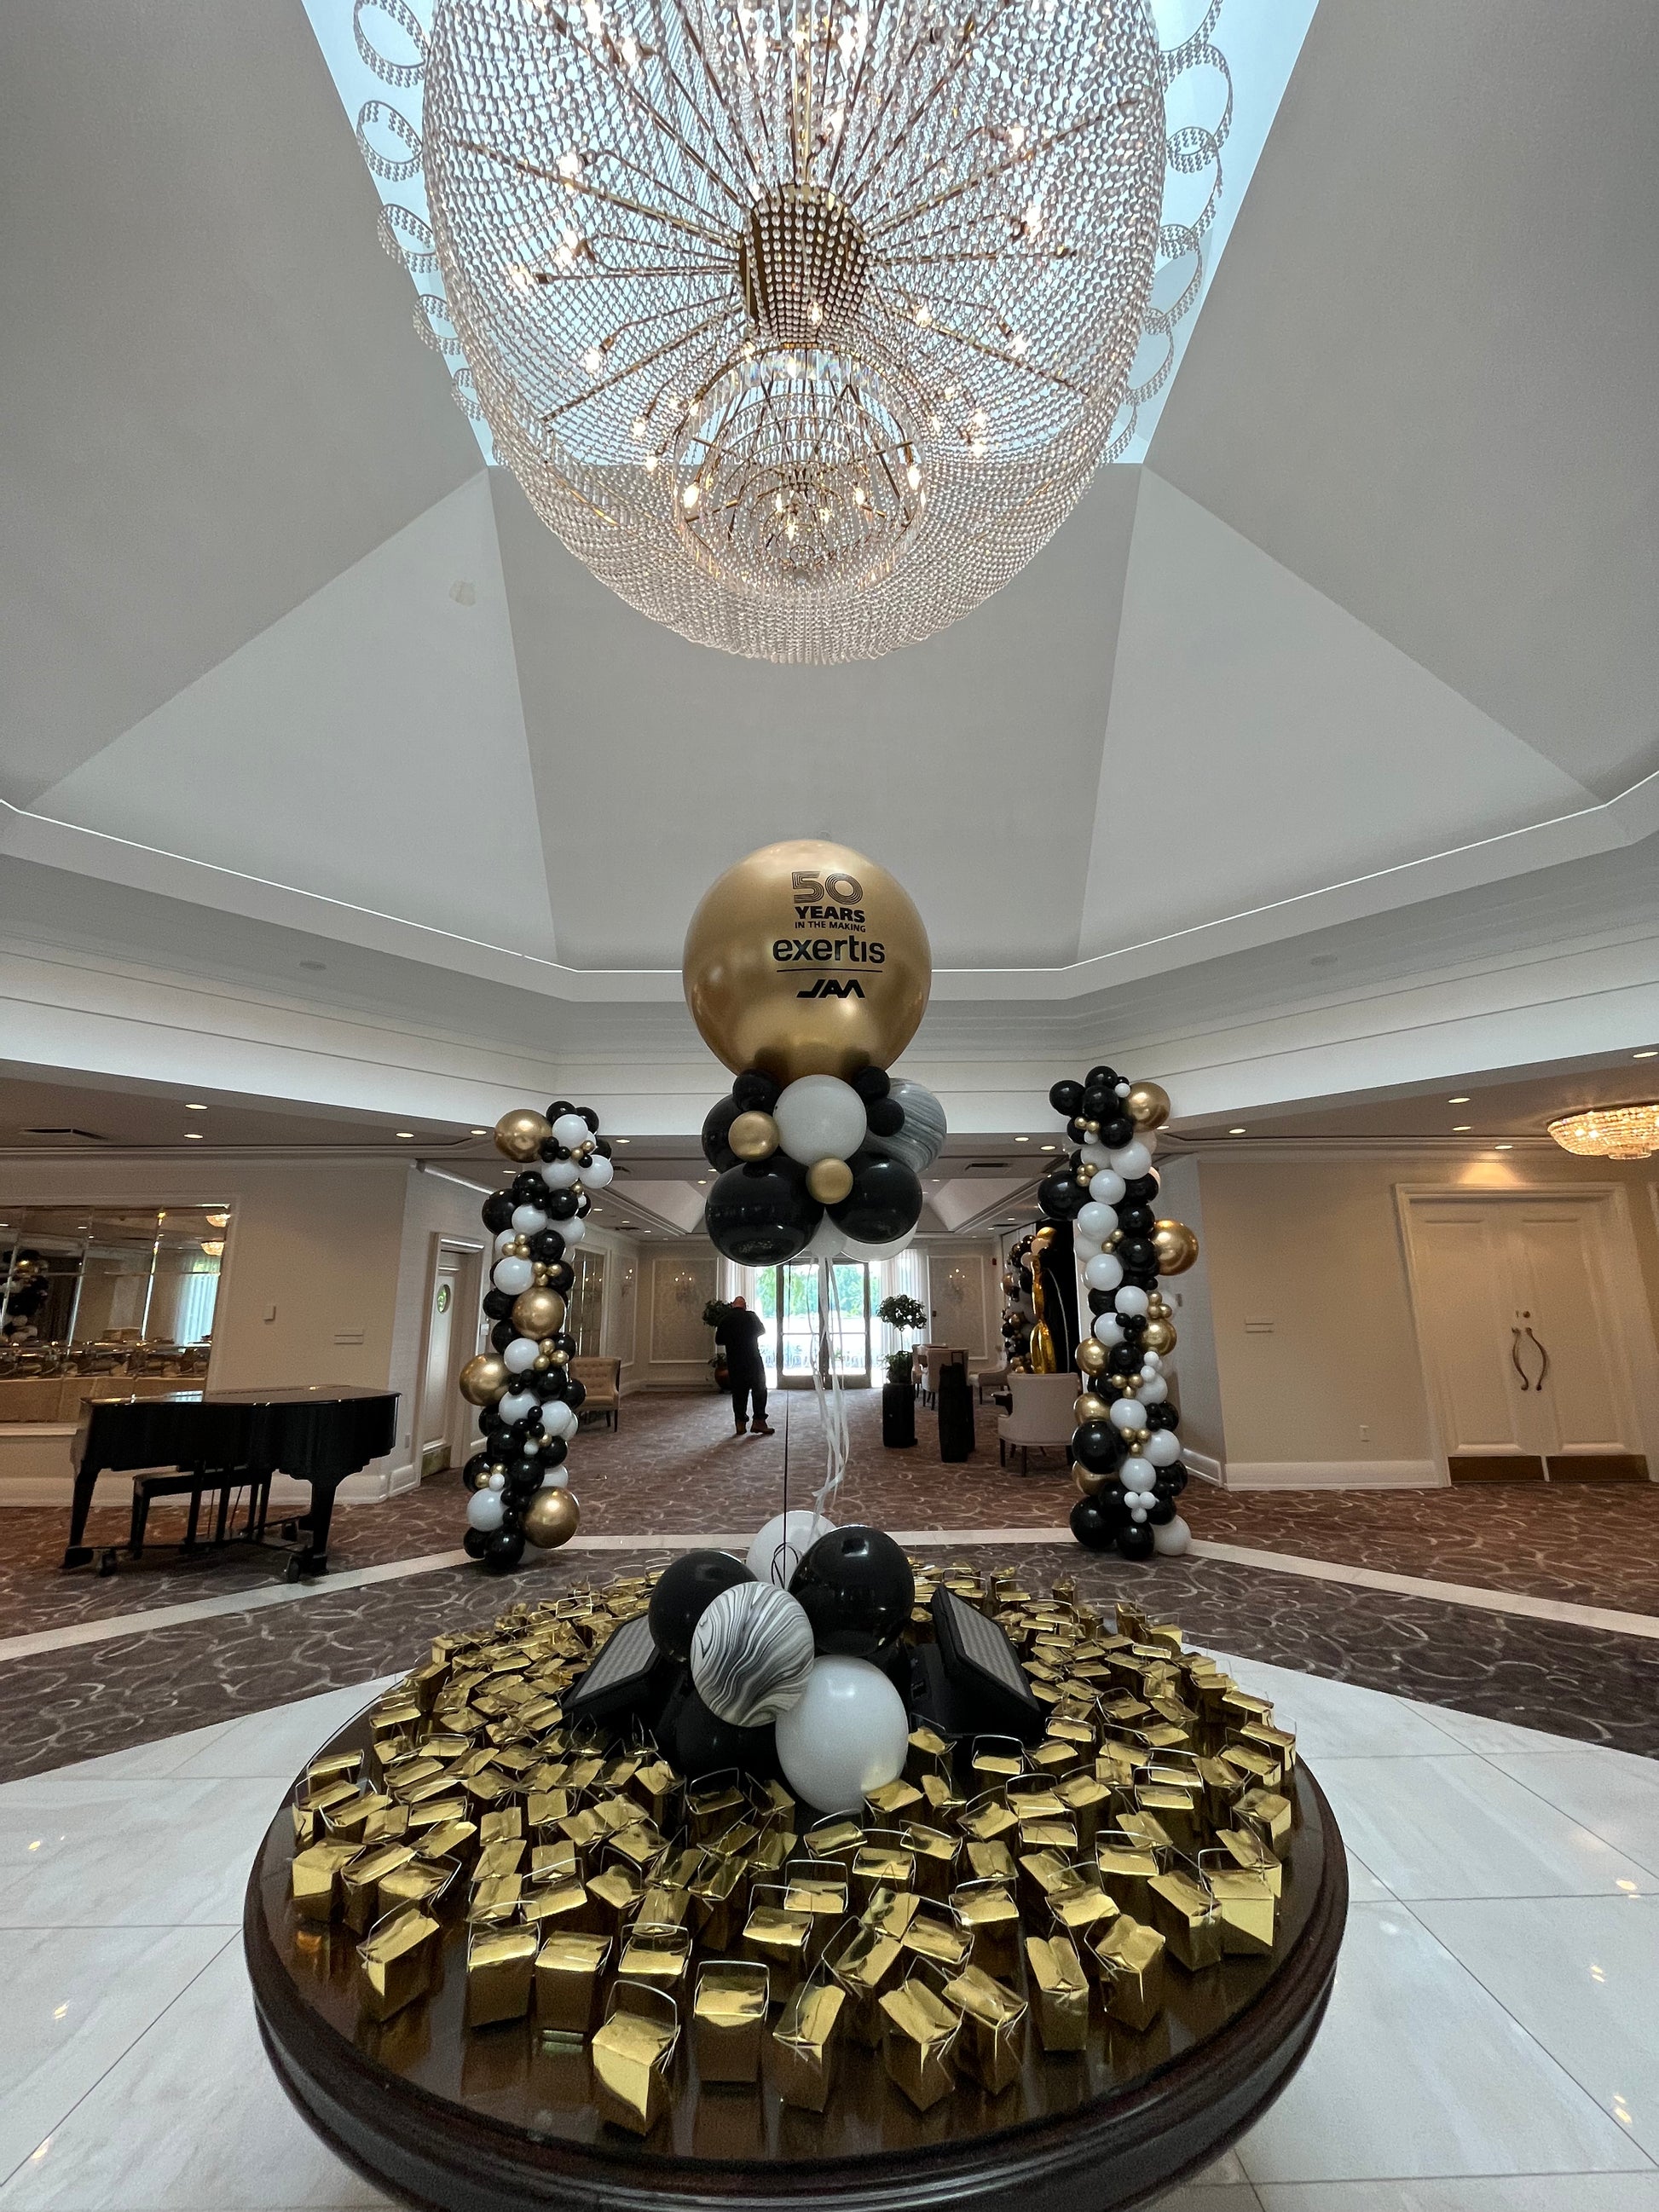 24 inch gold latex helium ballon for table display